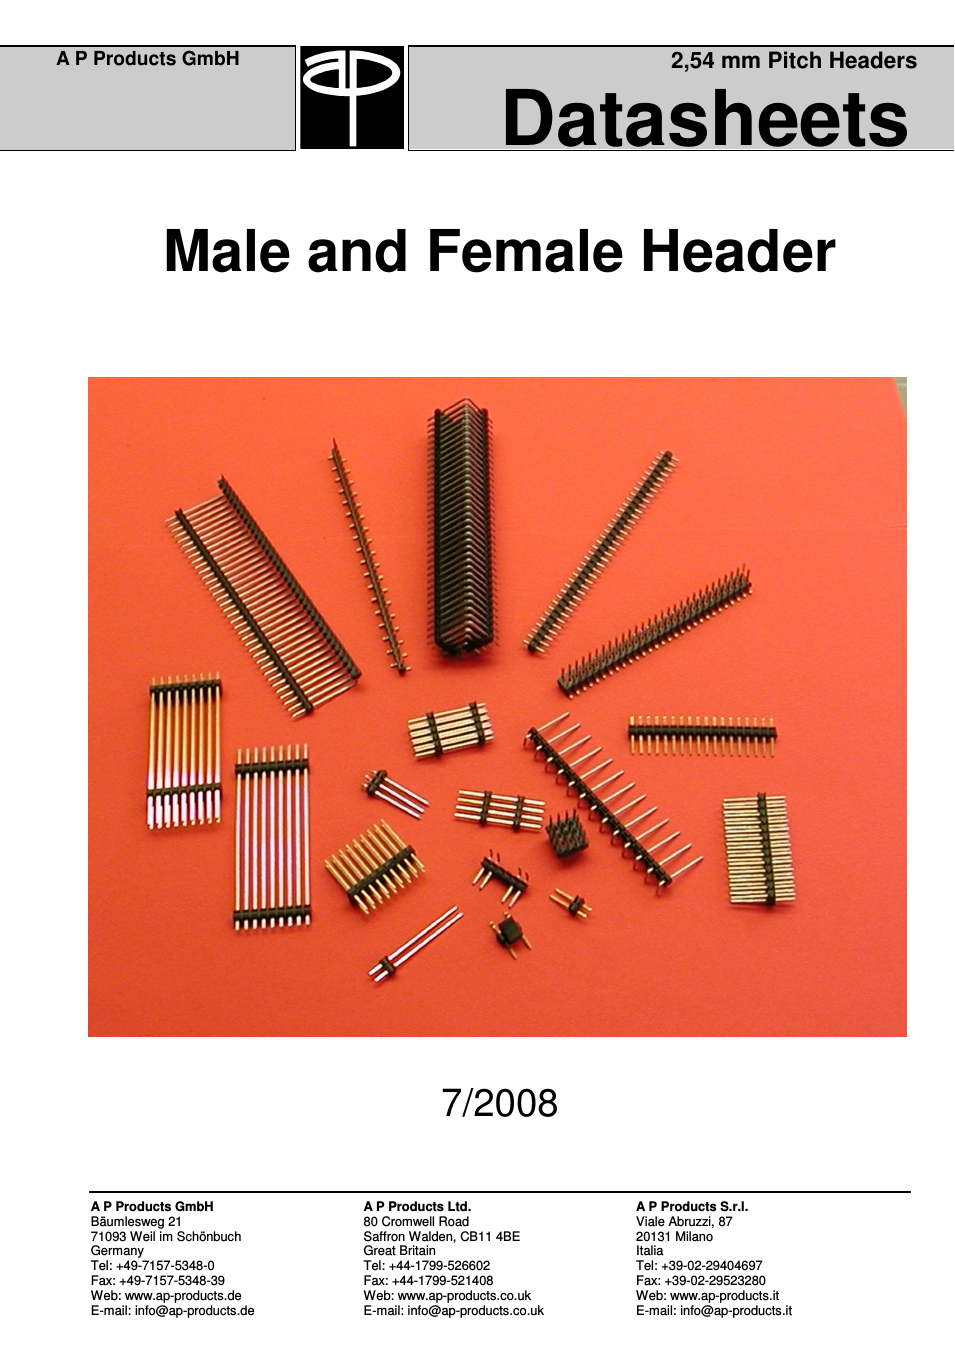 Male and Female Header (Page 1)